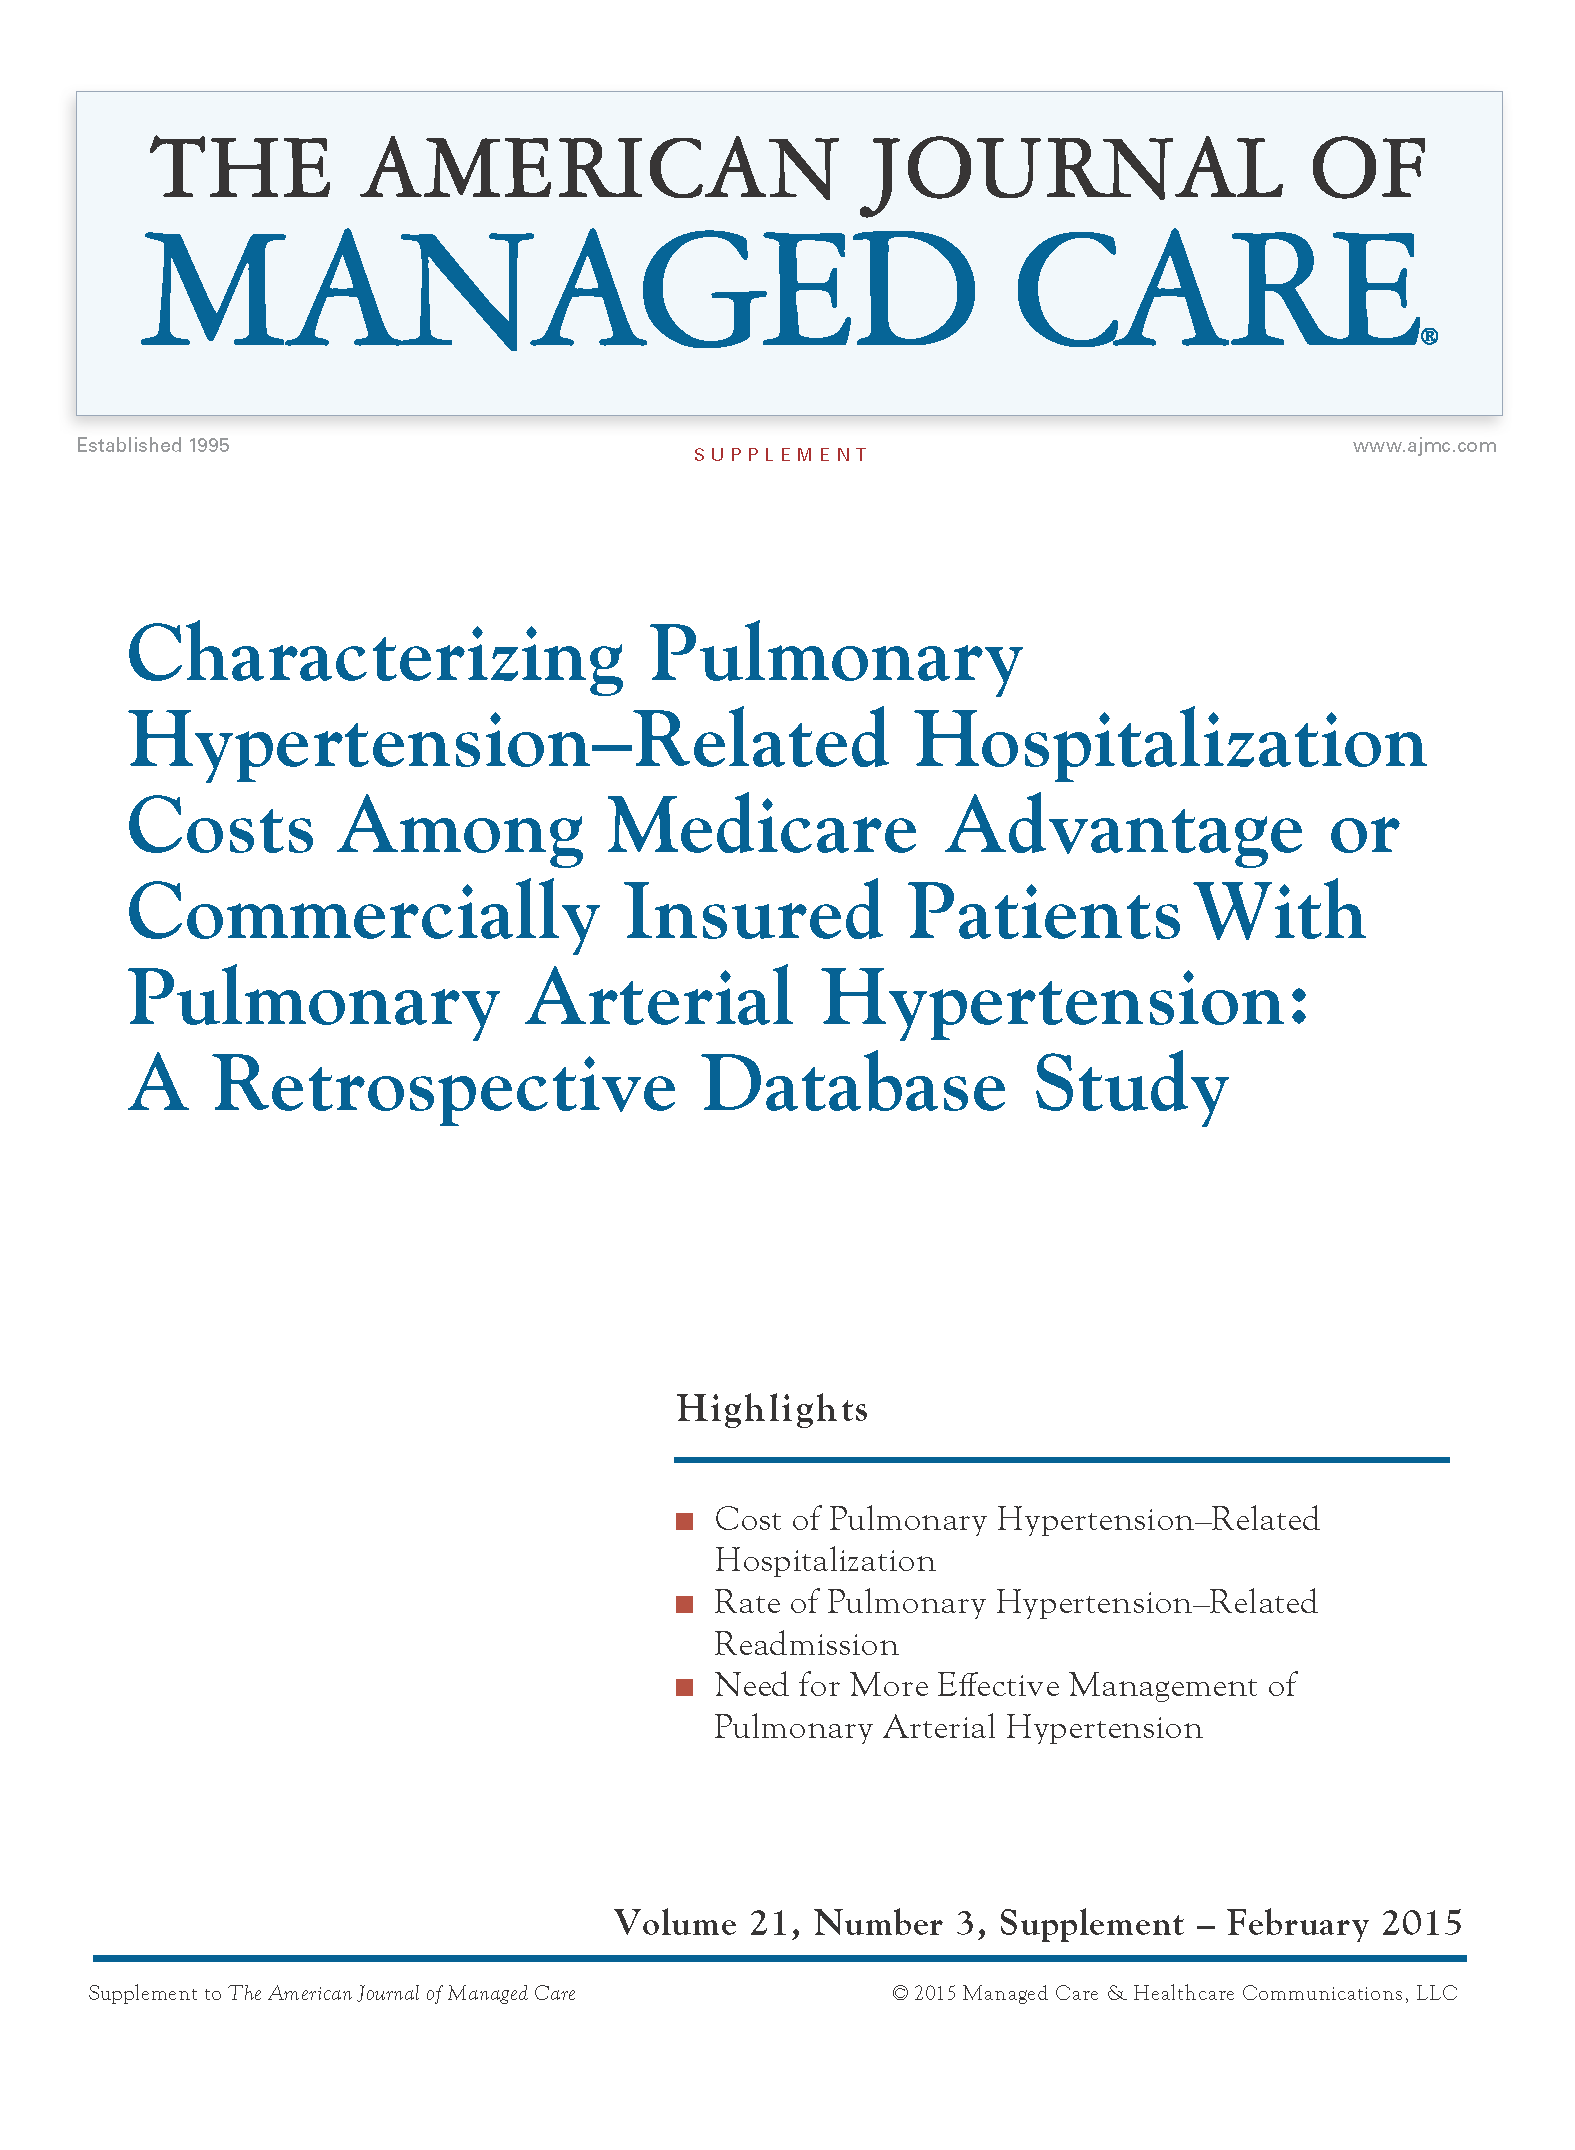 Characterizing Pulmonary Hypertensionâ€“Related Hospitalization Costs Among Medicare Advantage or Co